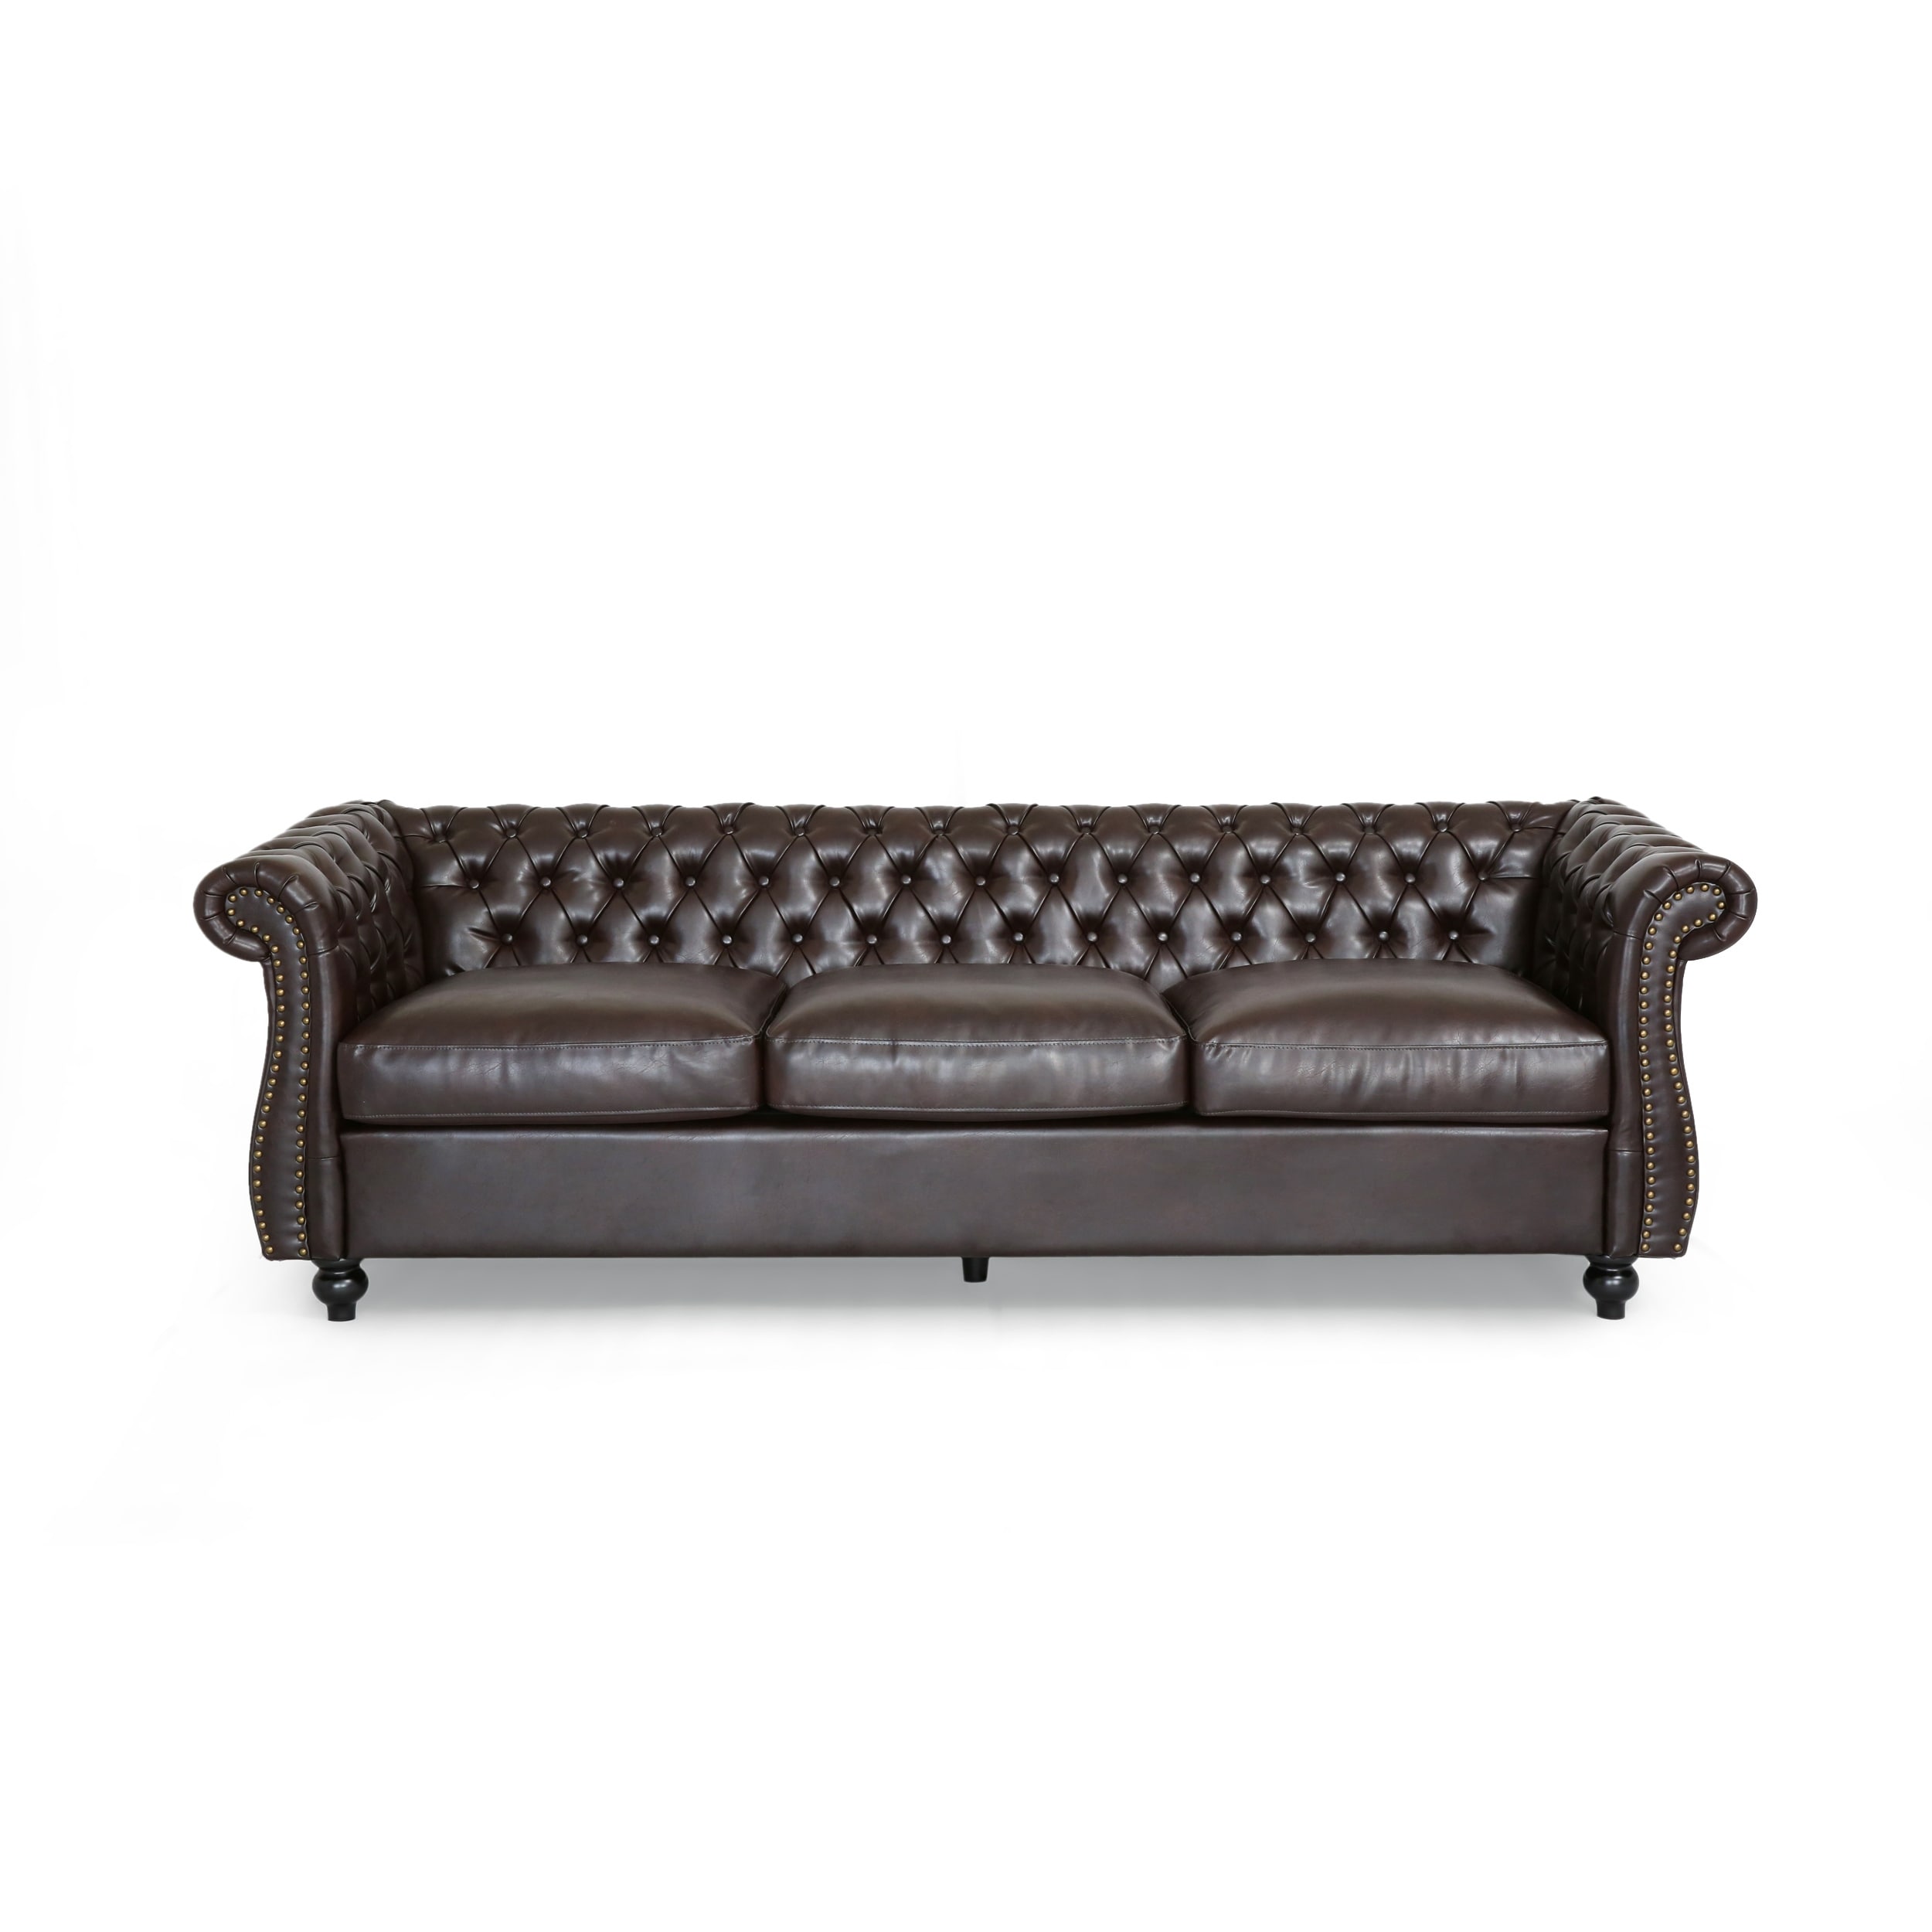 Christopher Knight Home Somerville Chesterfield Tufted Faux Leather Sofa with Scroll Arms by